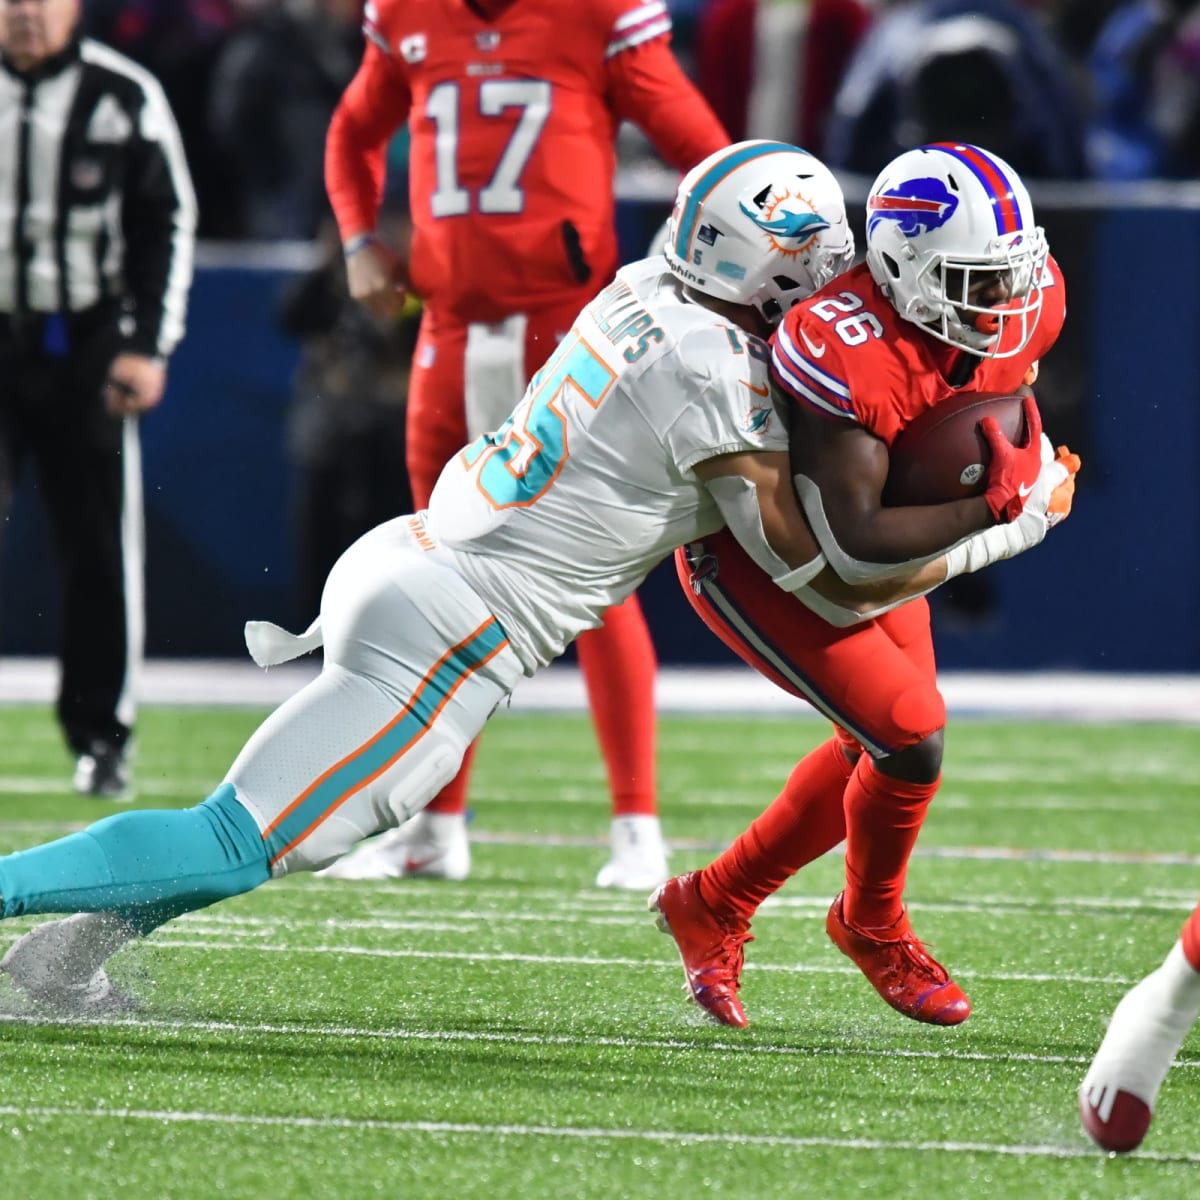 Bills playoff win over Dolphins ends with controversial call